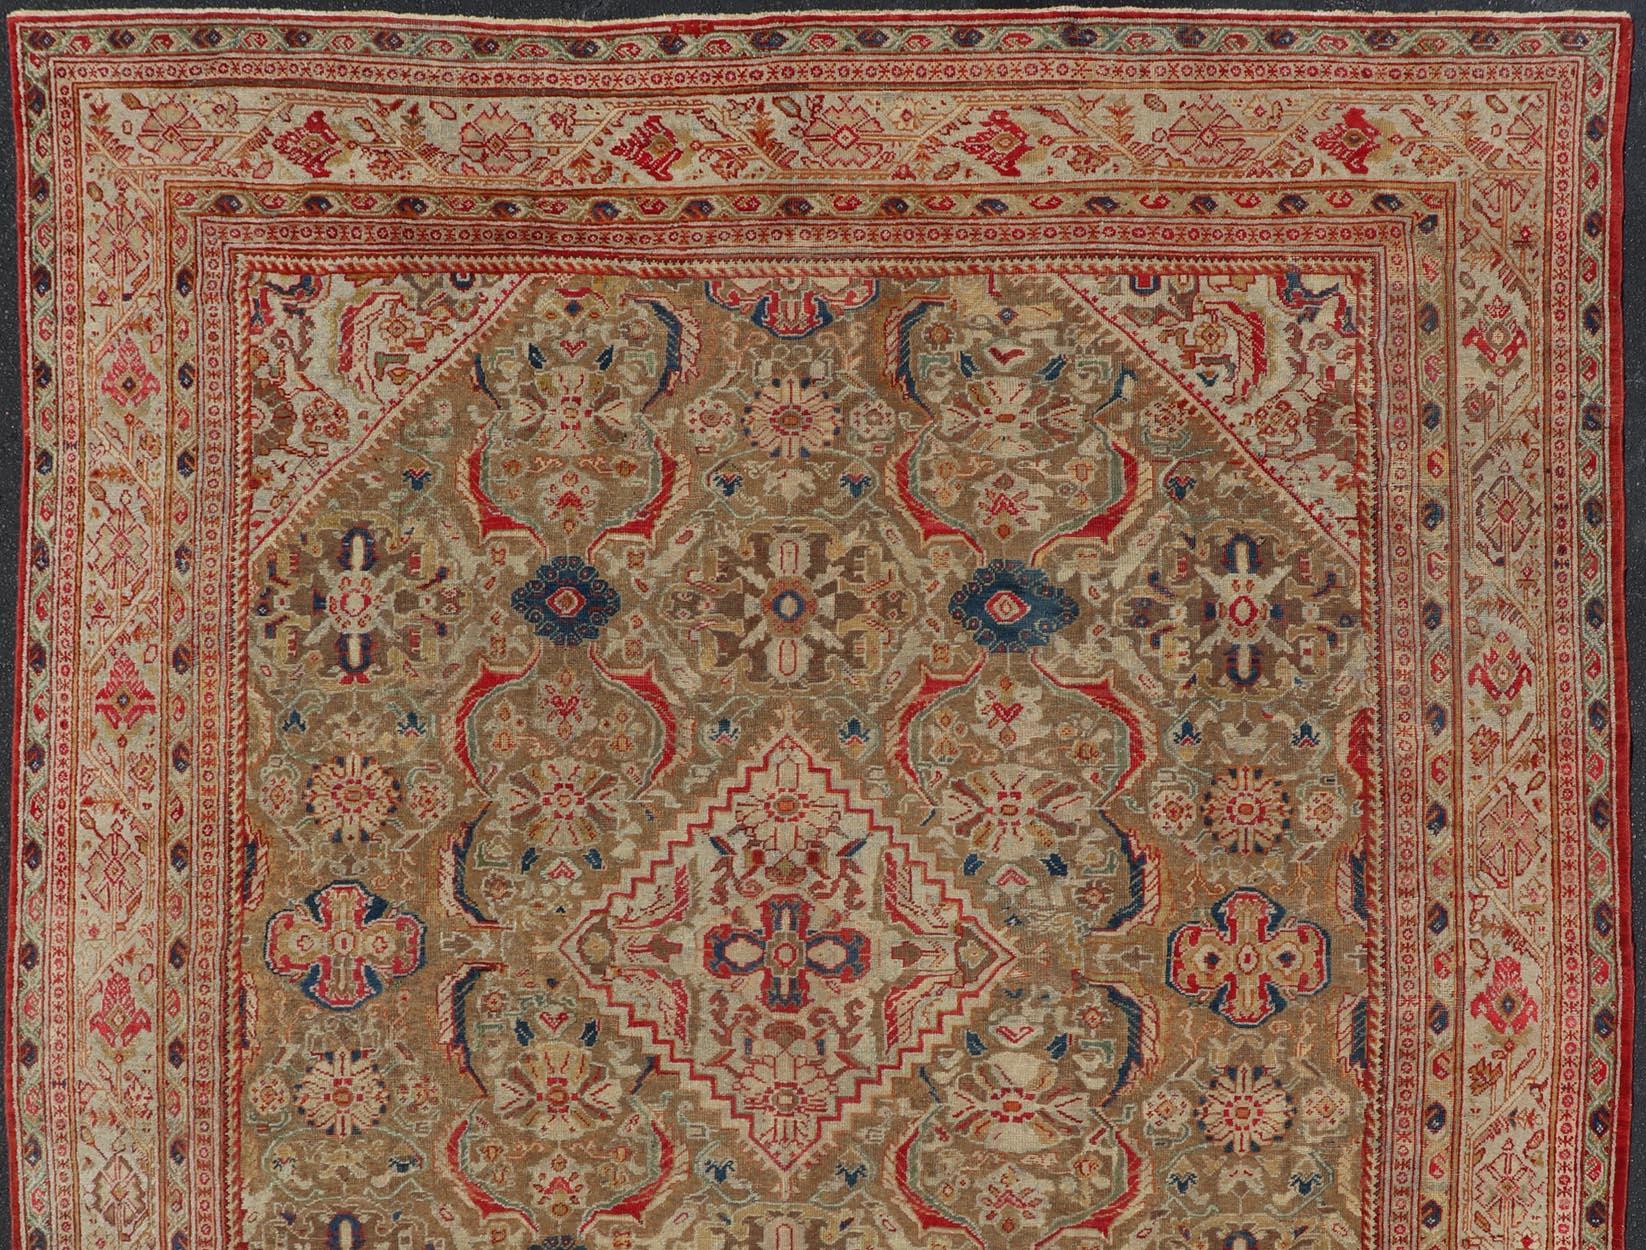 Antique Persian Sultanabad Carpet with Geometric Design In Green, Blue and Red For Sale 2